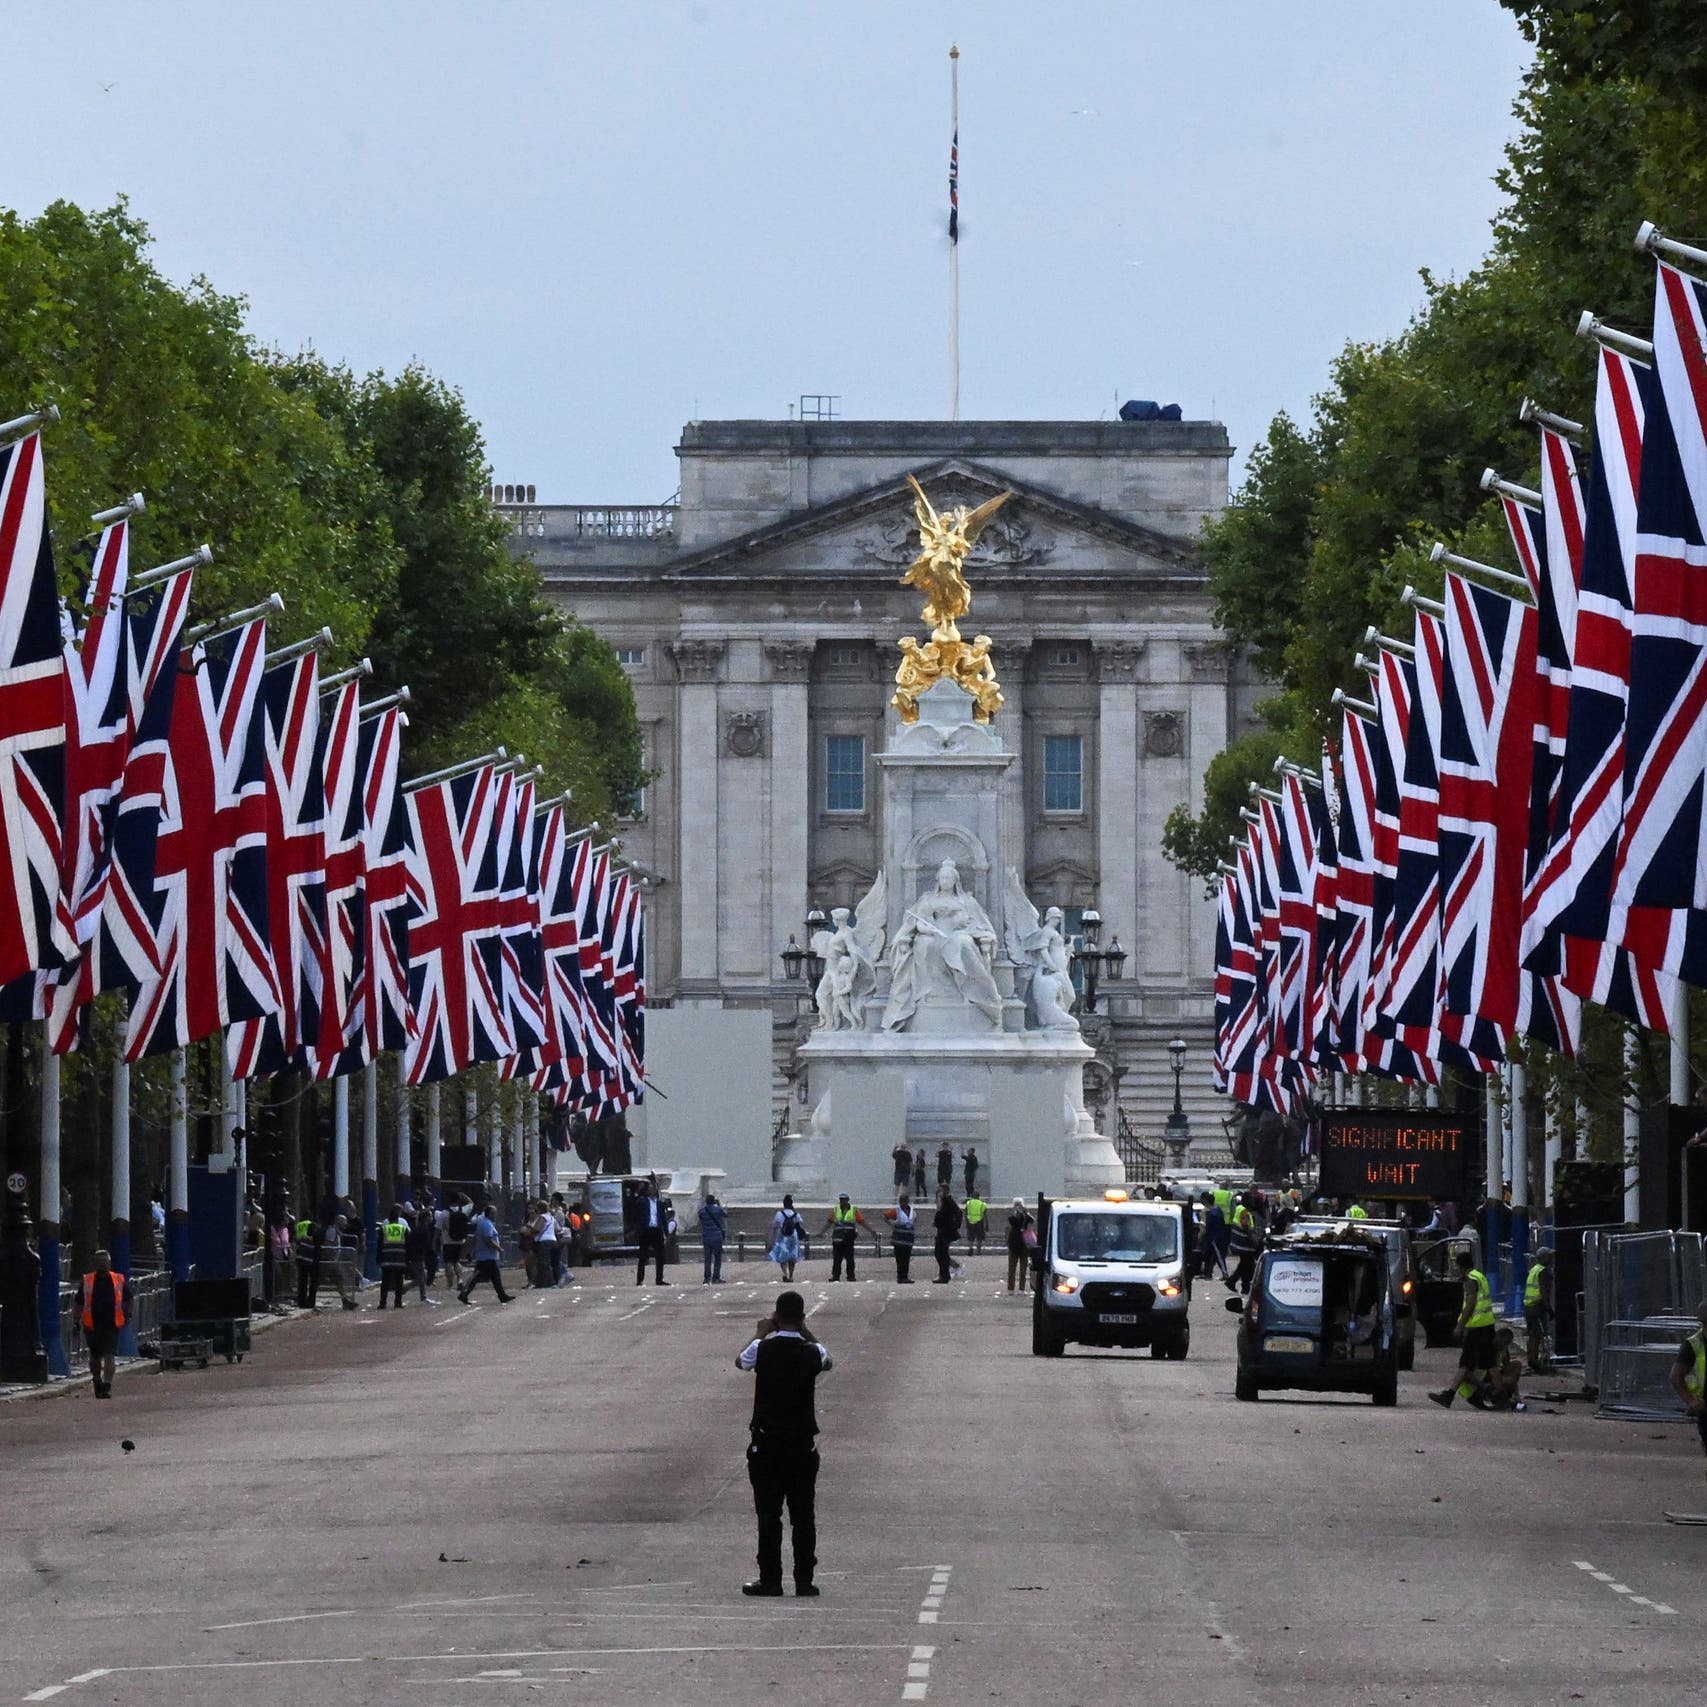 Queues to say goodbye to the Queen are pouring out.. this is what London asked of people